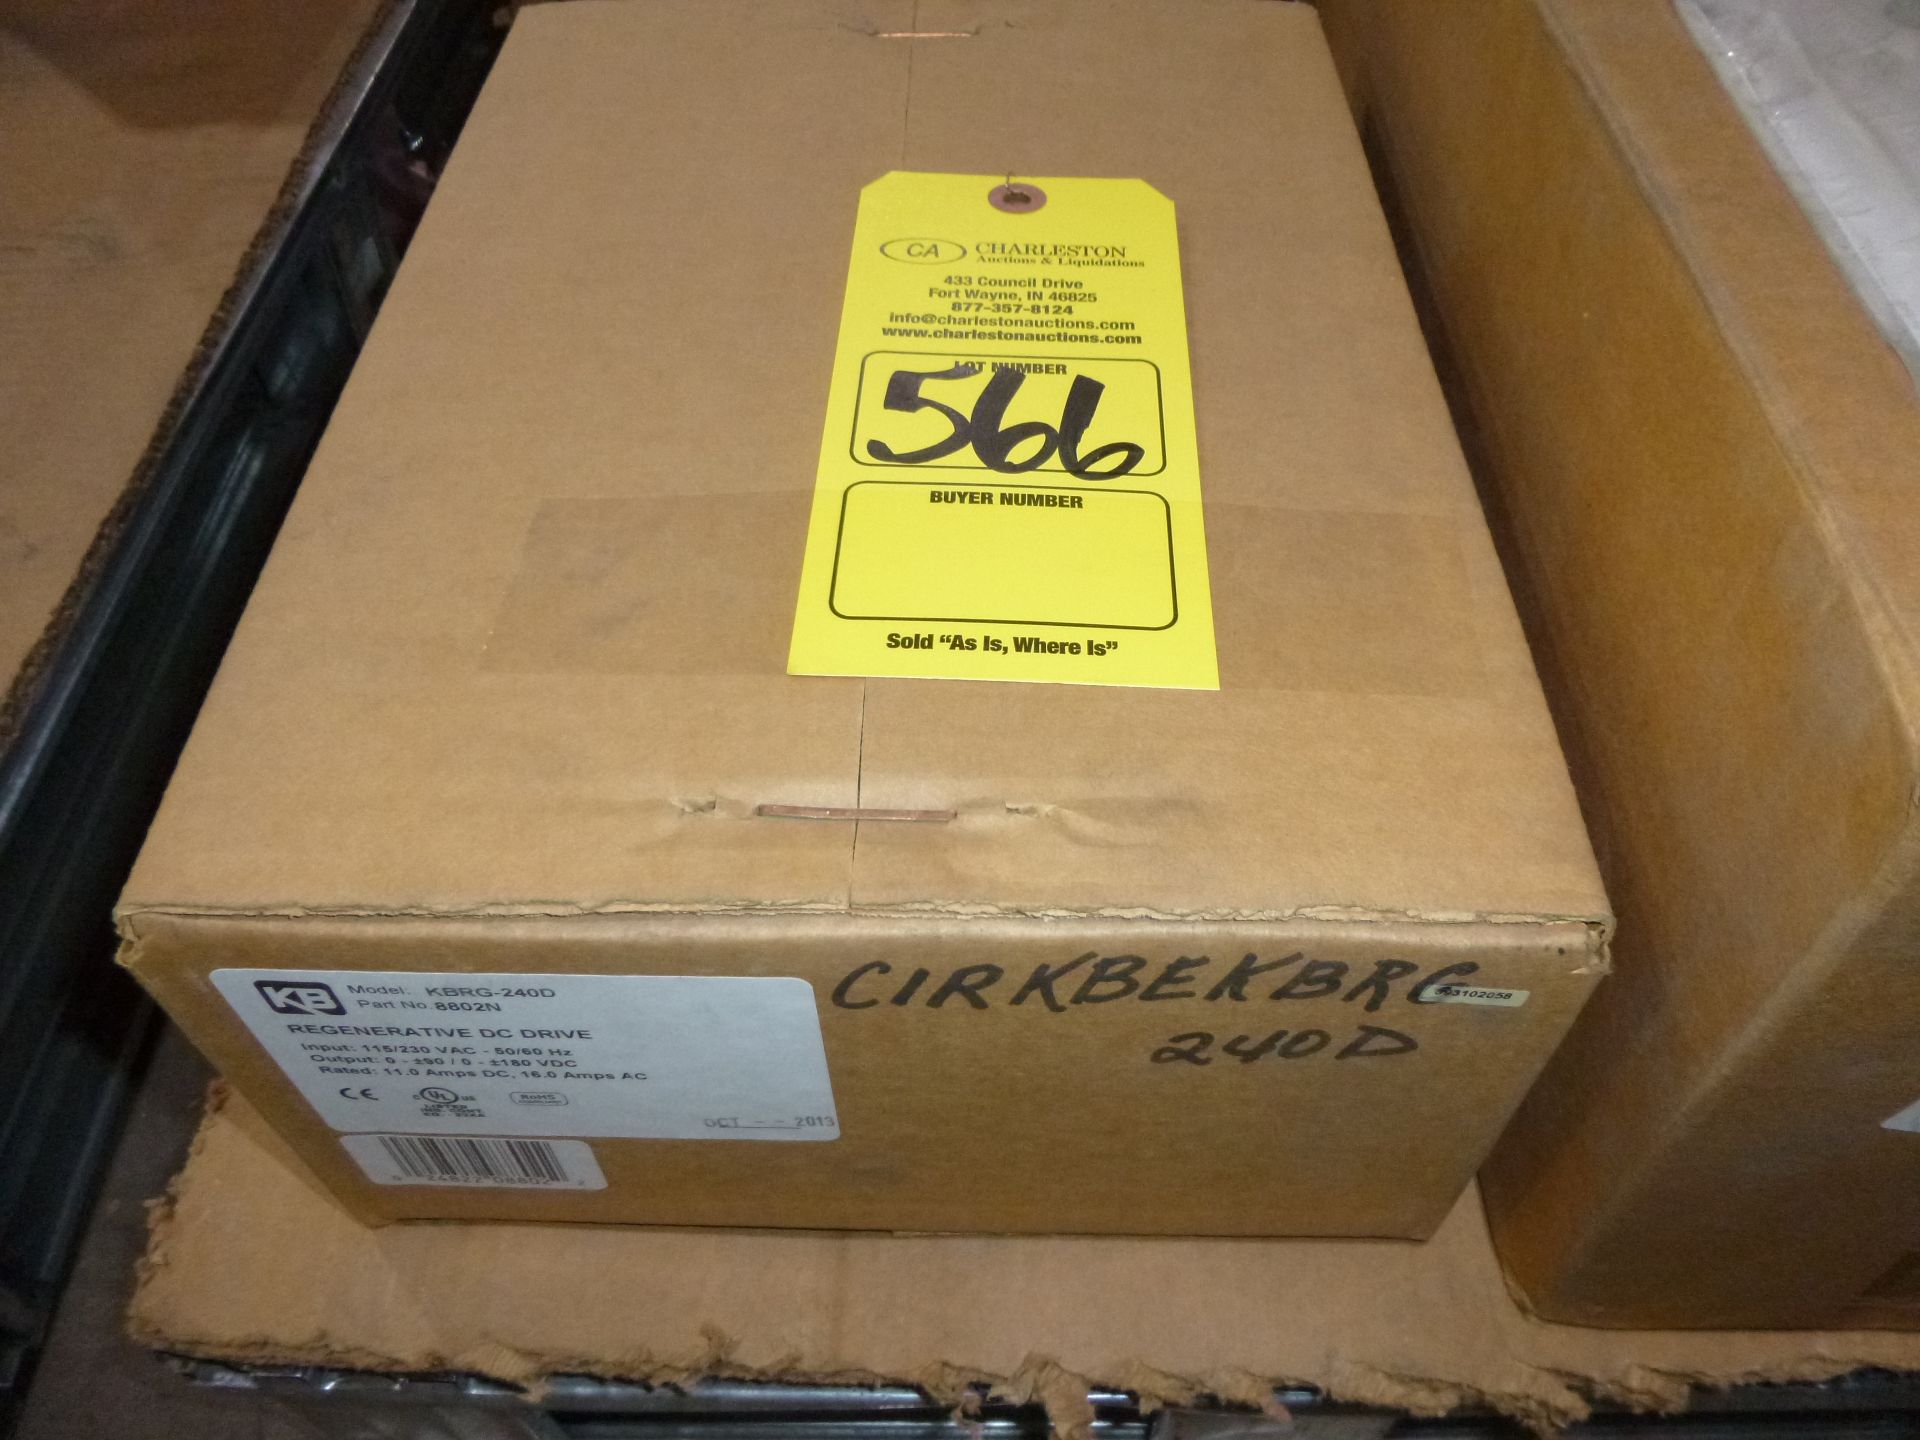 KB regenerative DC drive model KBRG-240D, new in box, as always with Brolyn LLC auctions, all lots